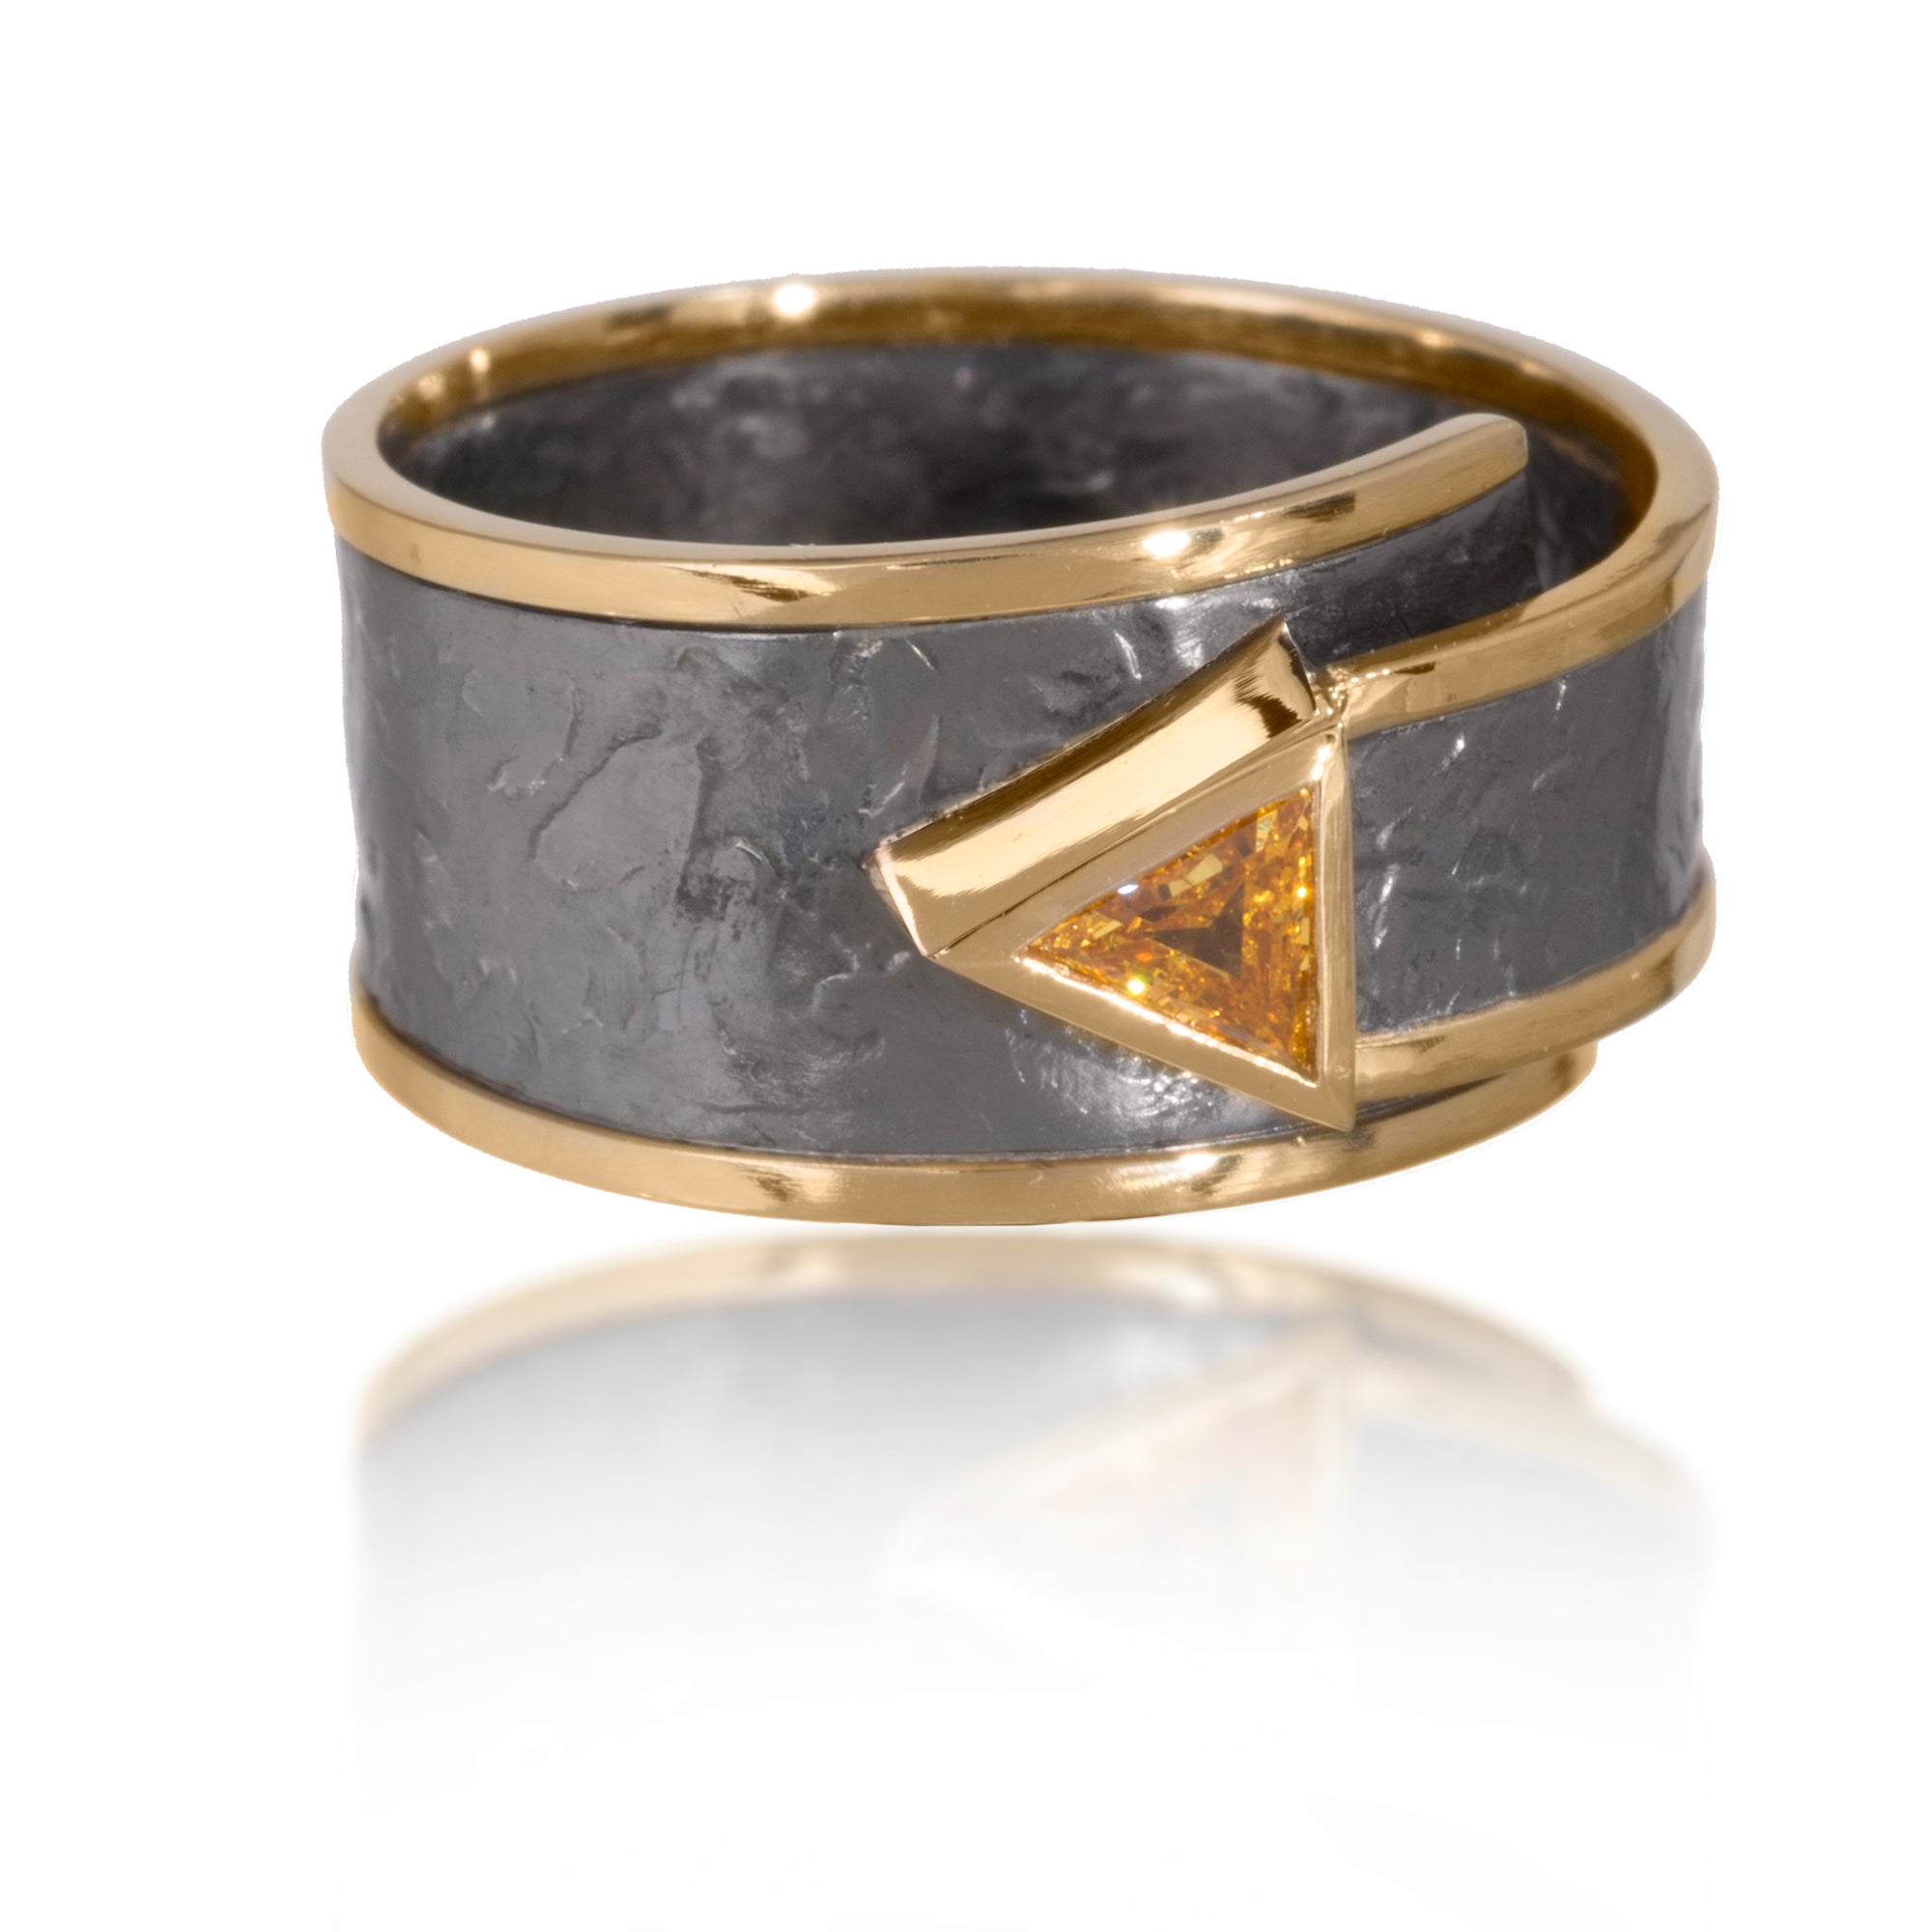 This simple, yet distinctive, one of kind ring in 18k gold and oxidized silver features a bezel set, angular shaped, natural diamond, 0.17 tcw.  It is forged, textured and fabricated by hand.  